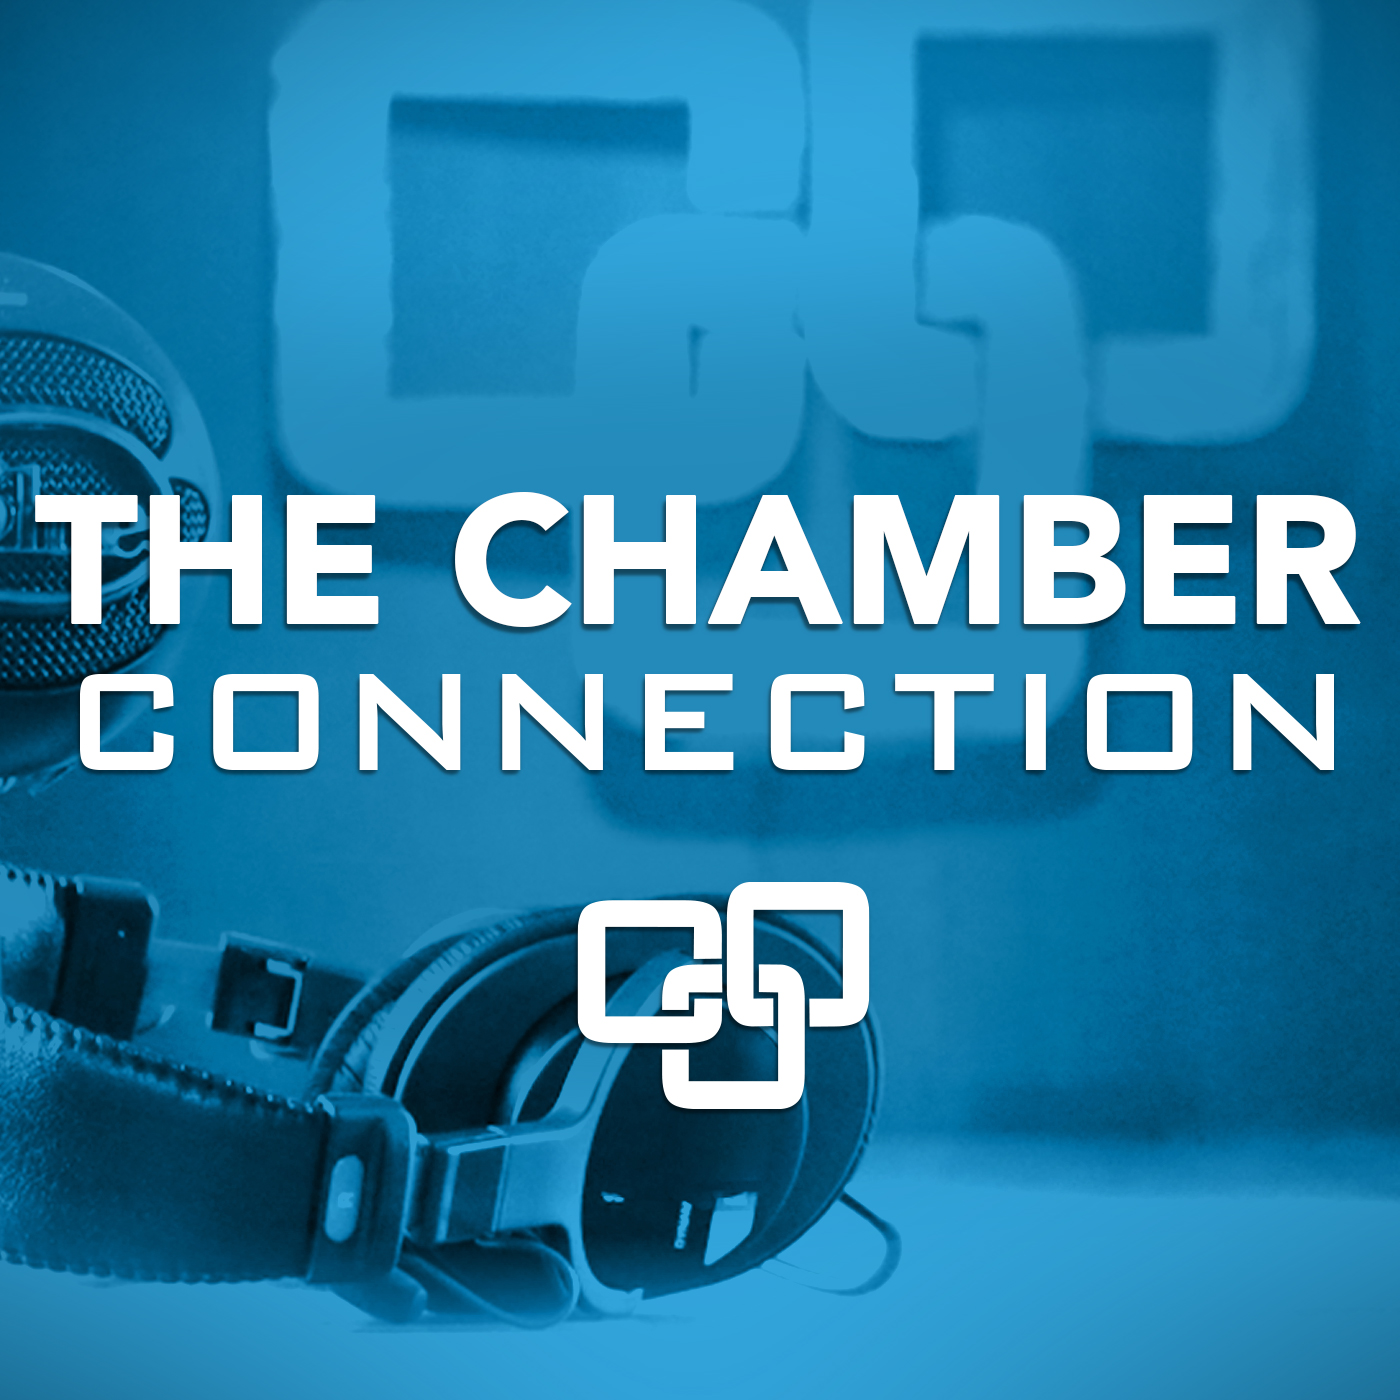 The Chamber Connection  Featuring Taylor Syvertson from Great Plains Food Bank